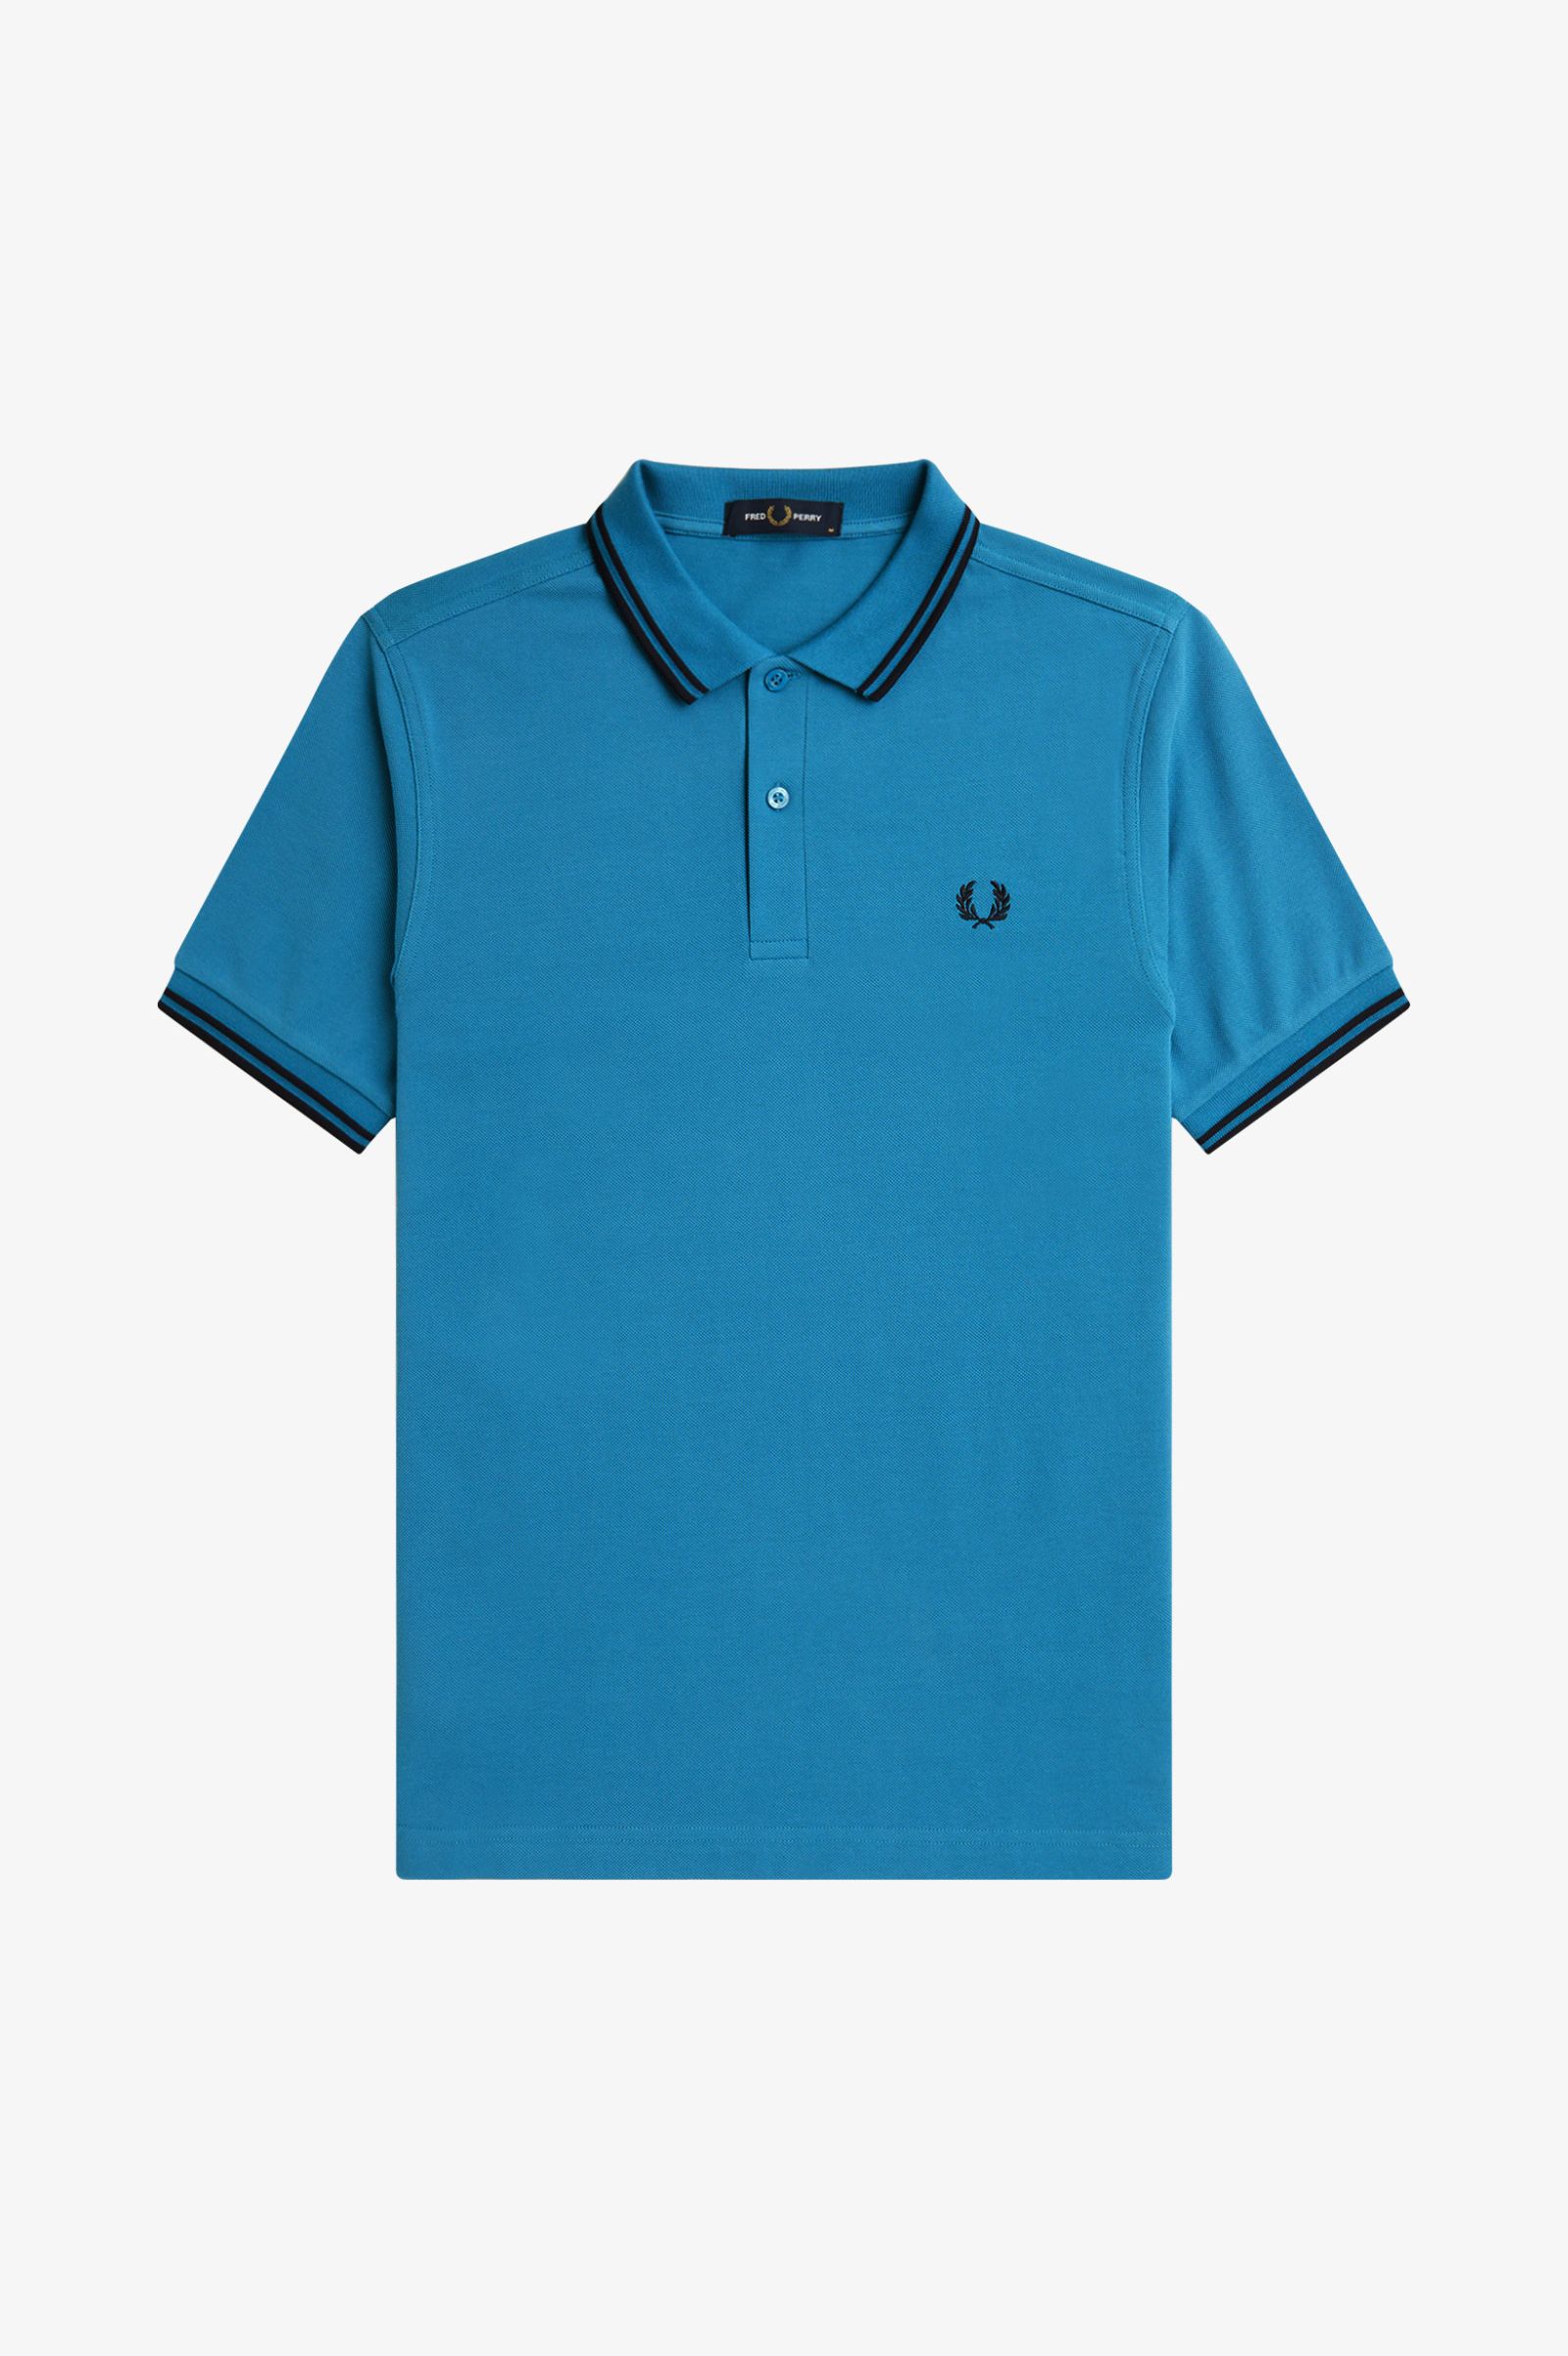 Fred Perry Twin Tipped Shirt M3600 in Ocean/Navy 